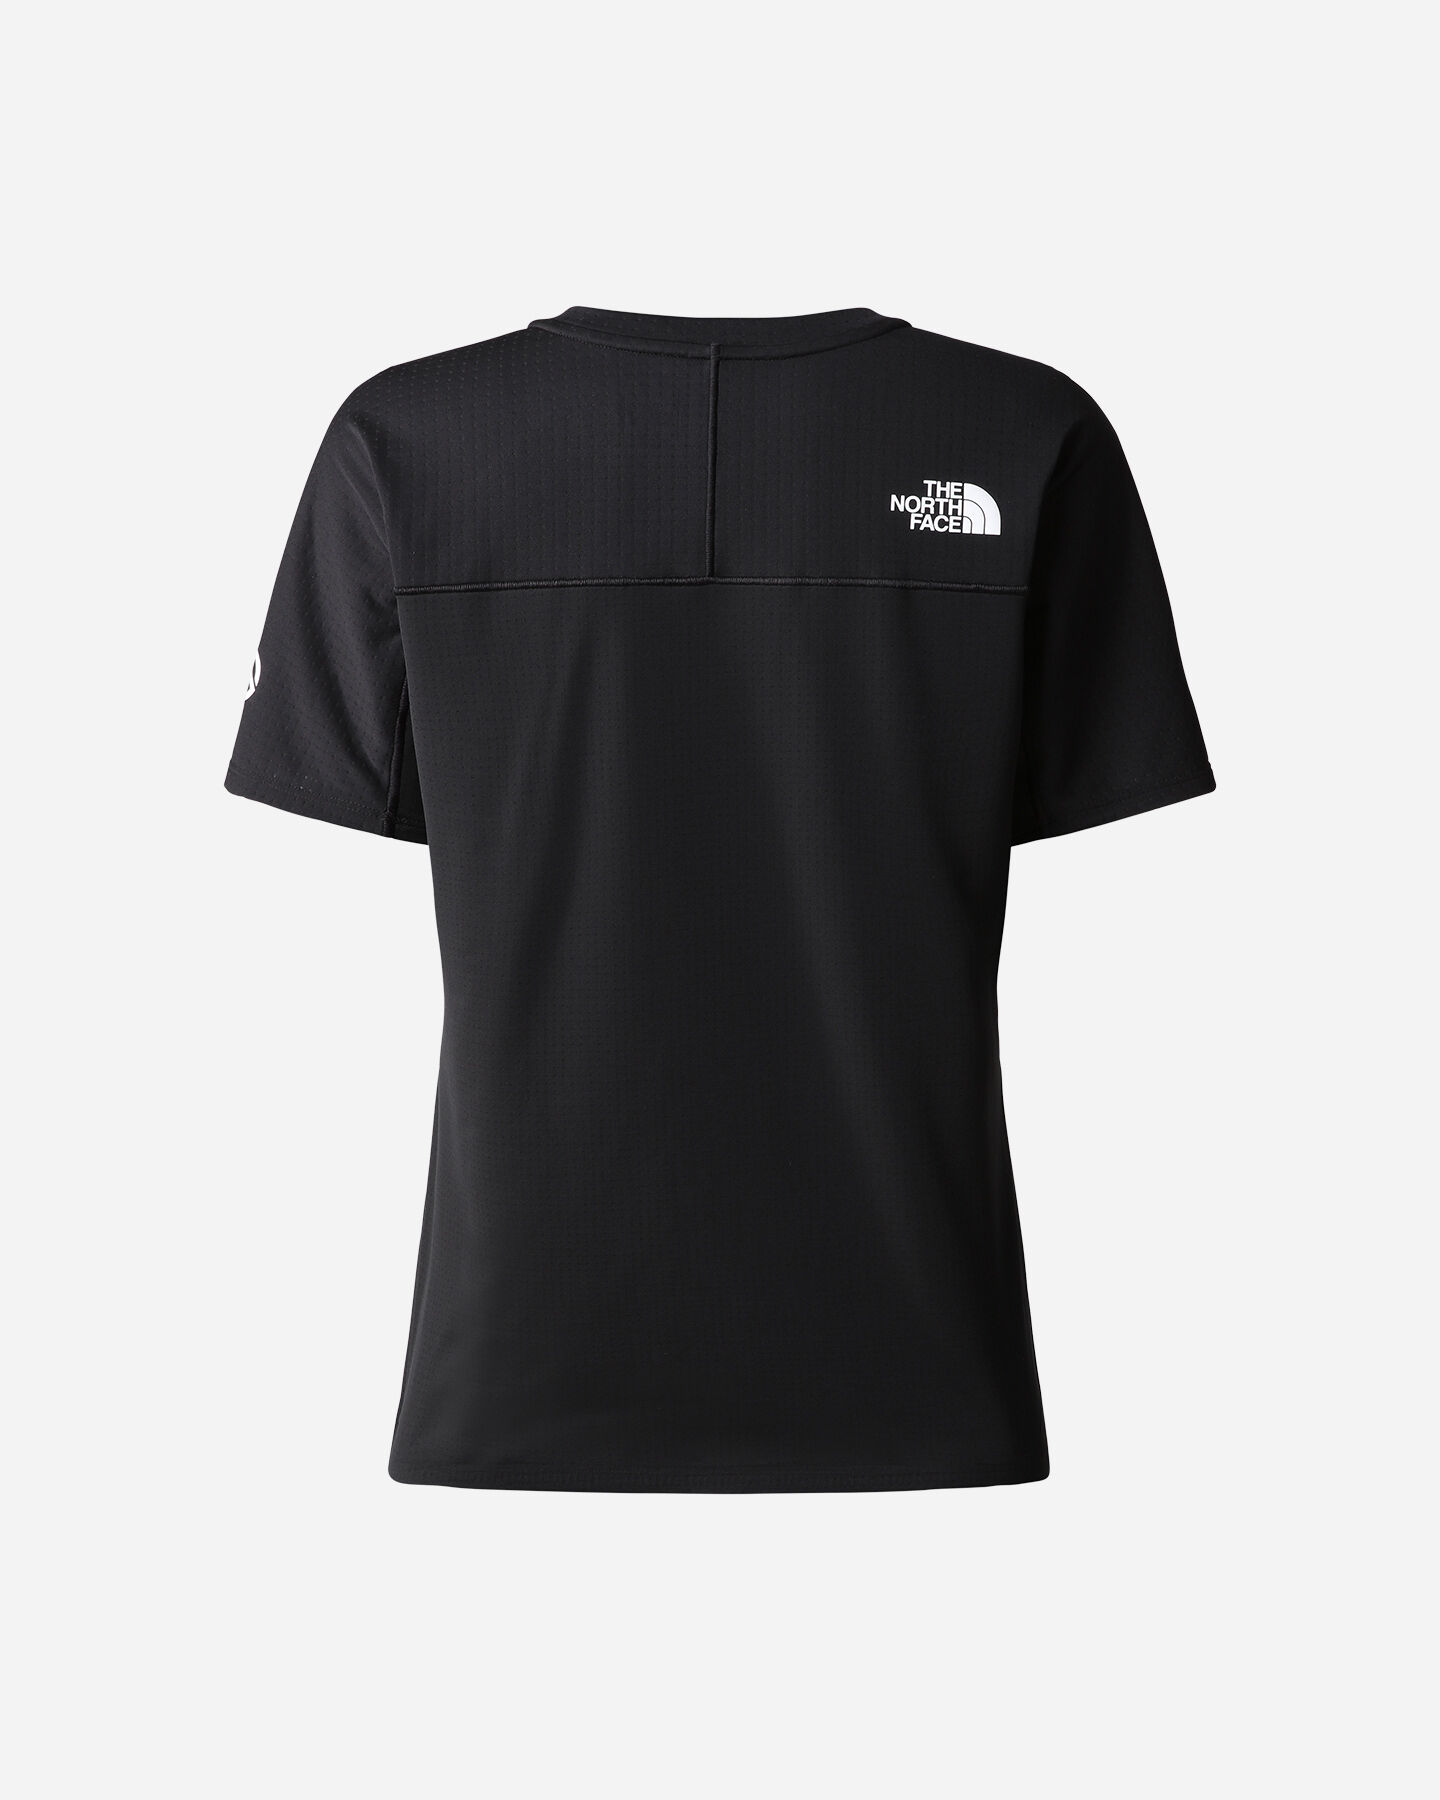  T-Shirt THE NORTH FACE SUMMIT CREVASSE W S5536554|JK3|XS scatto 1